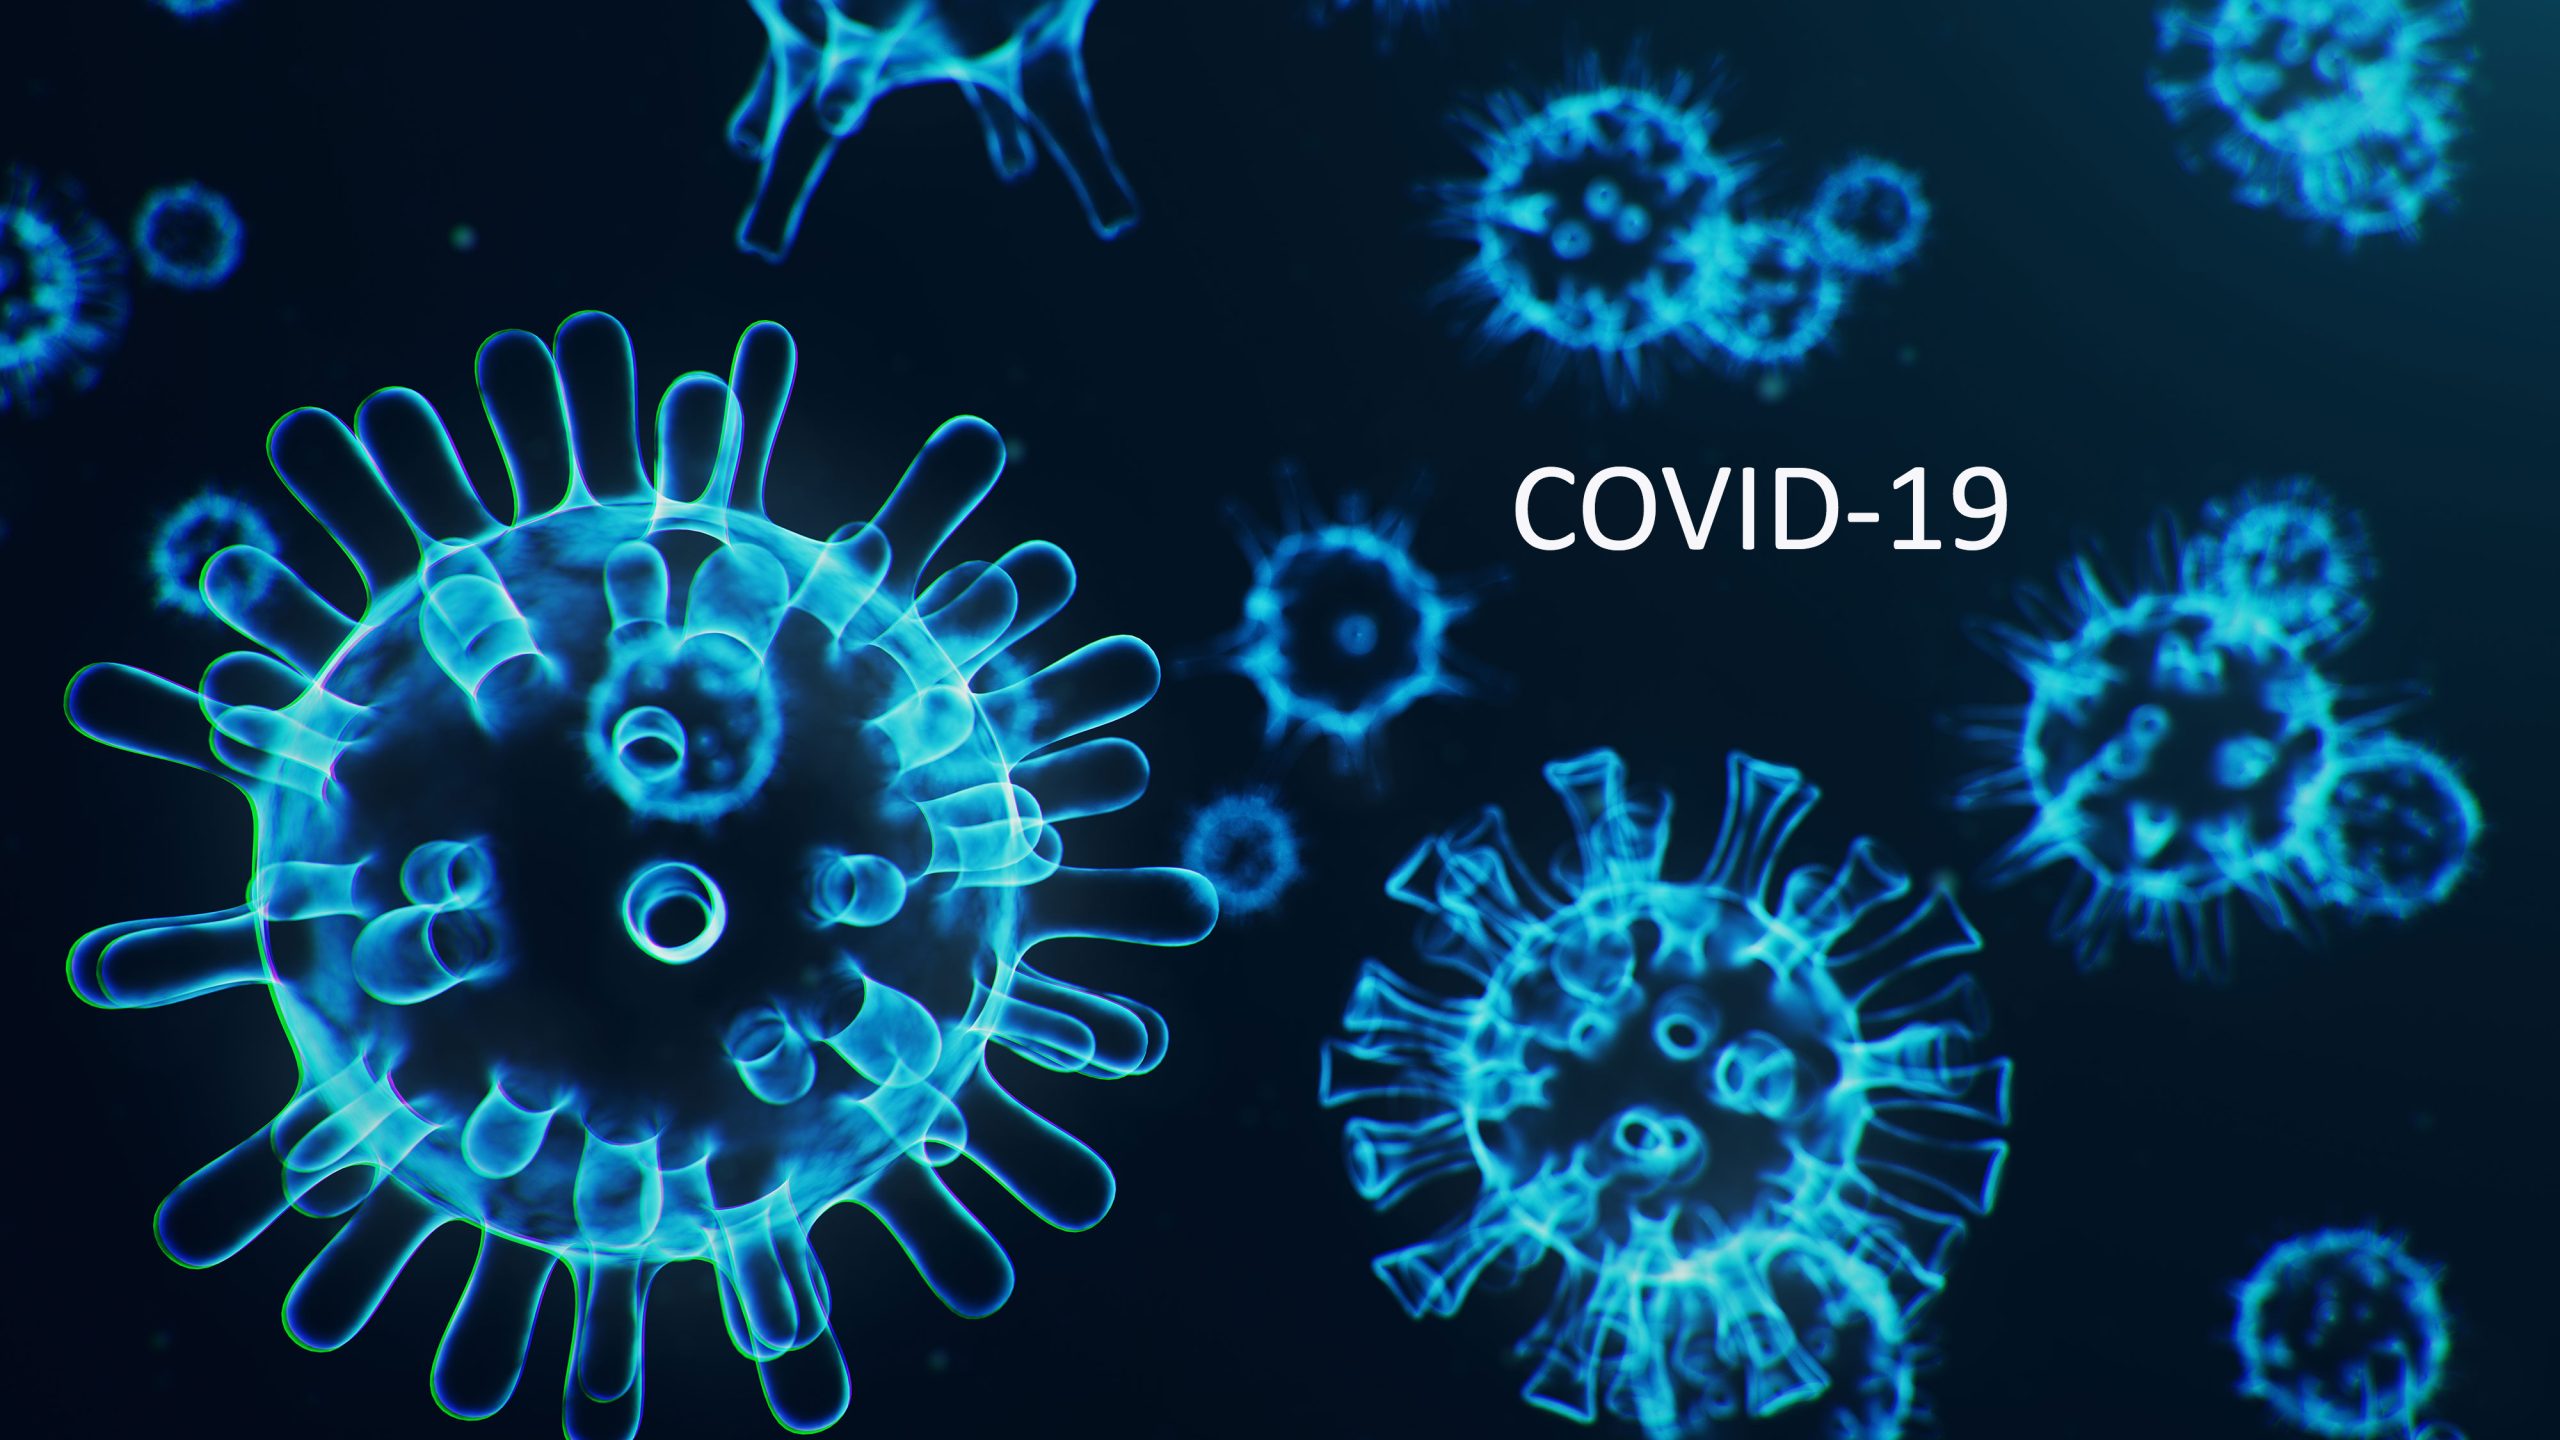 COVID-19 cases, hospitalizations declining